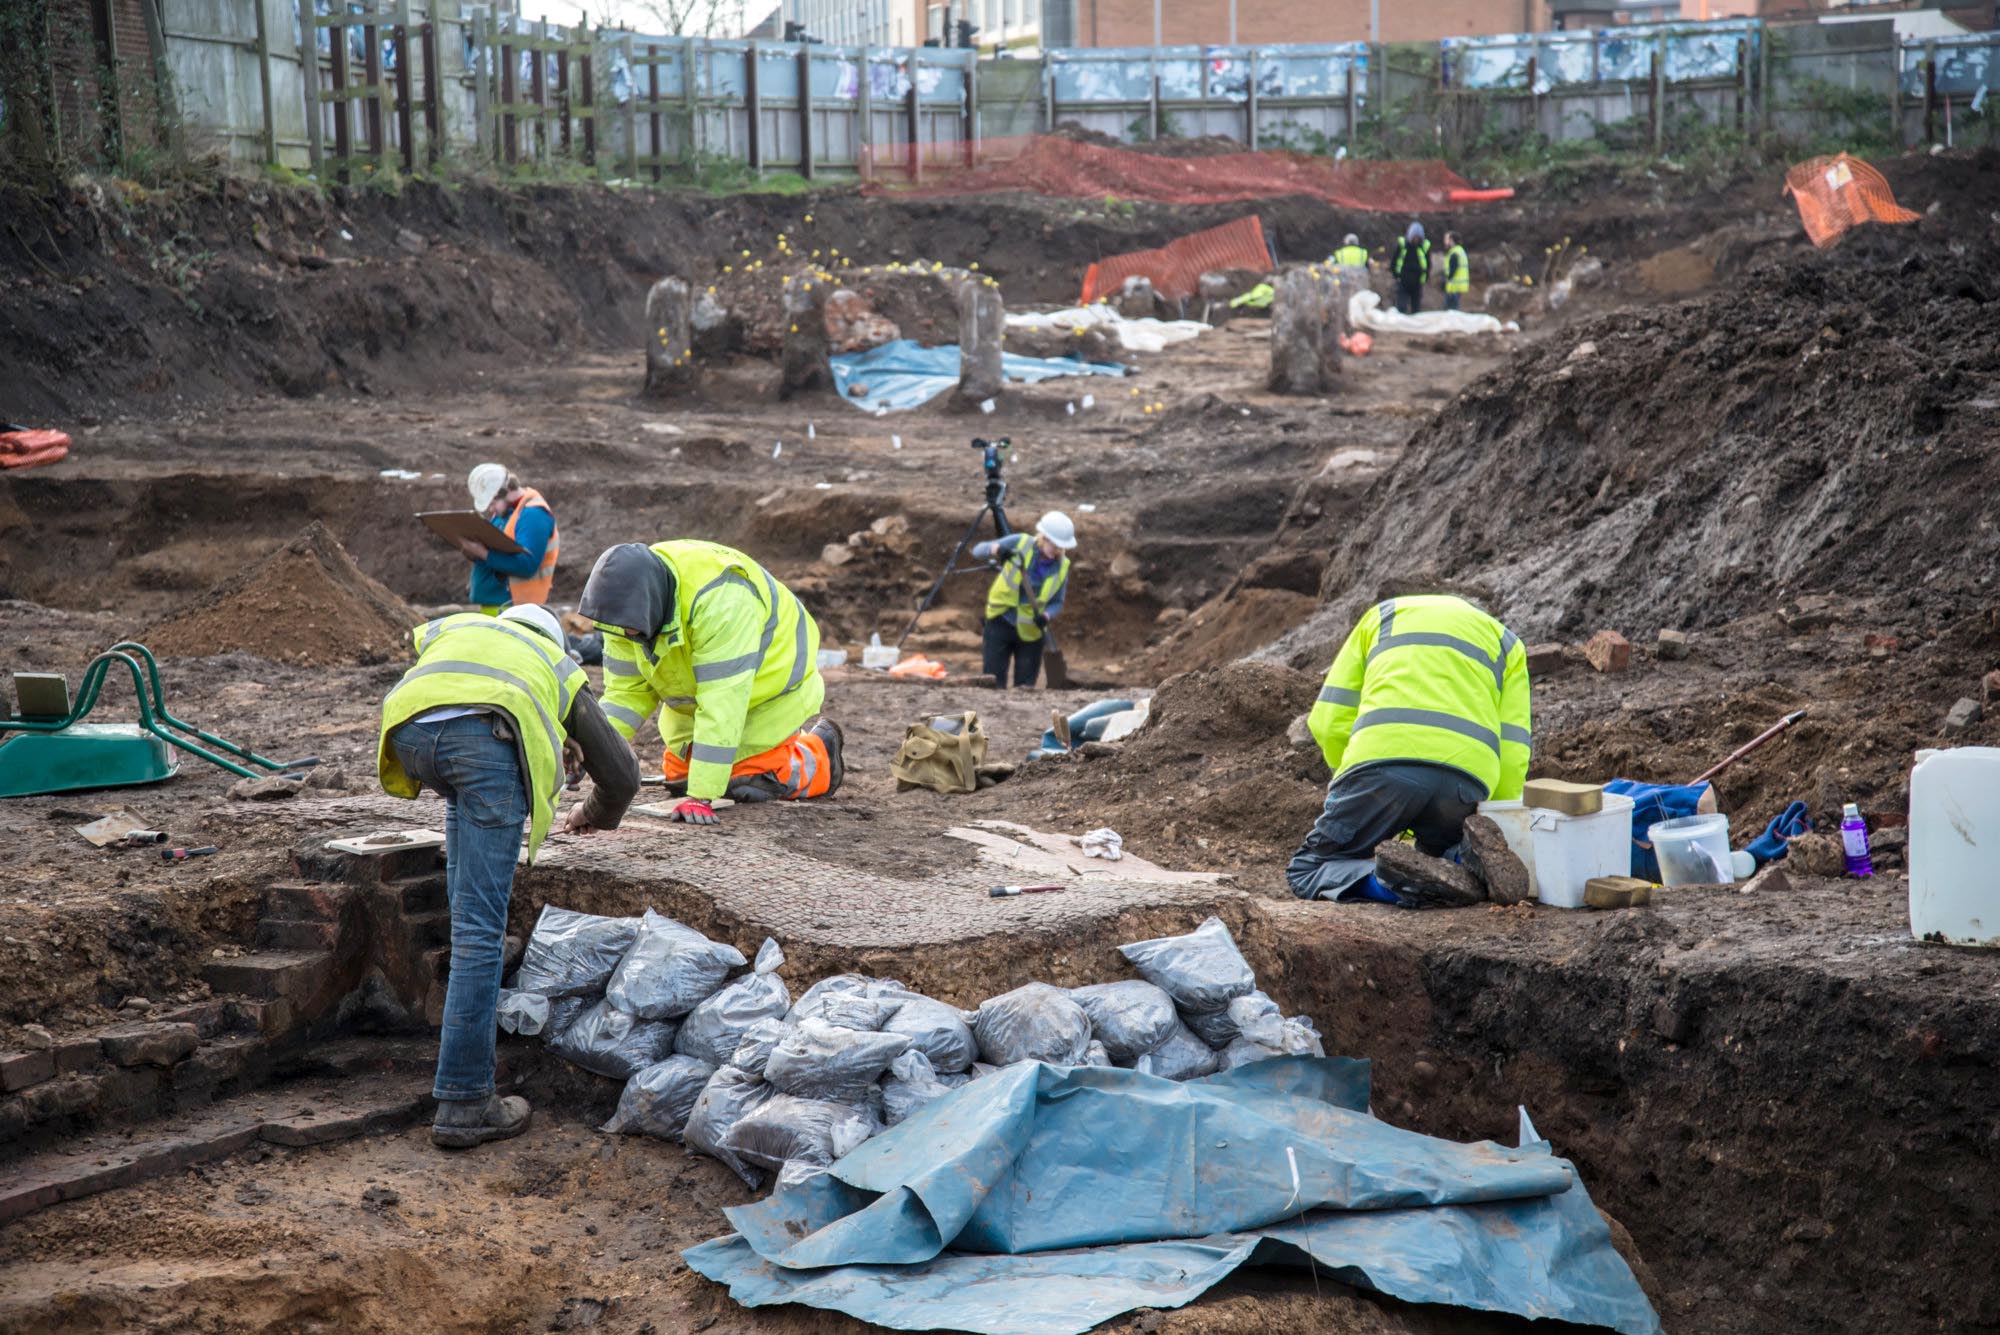 The archaeological dig seen here took place in 2017 was very close to the original Vine Street dig site -